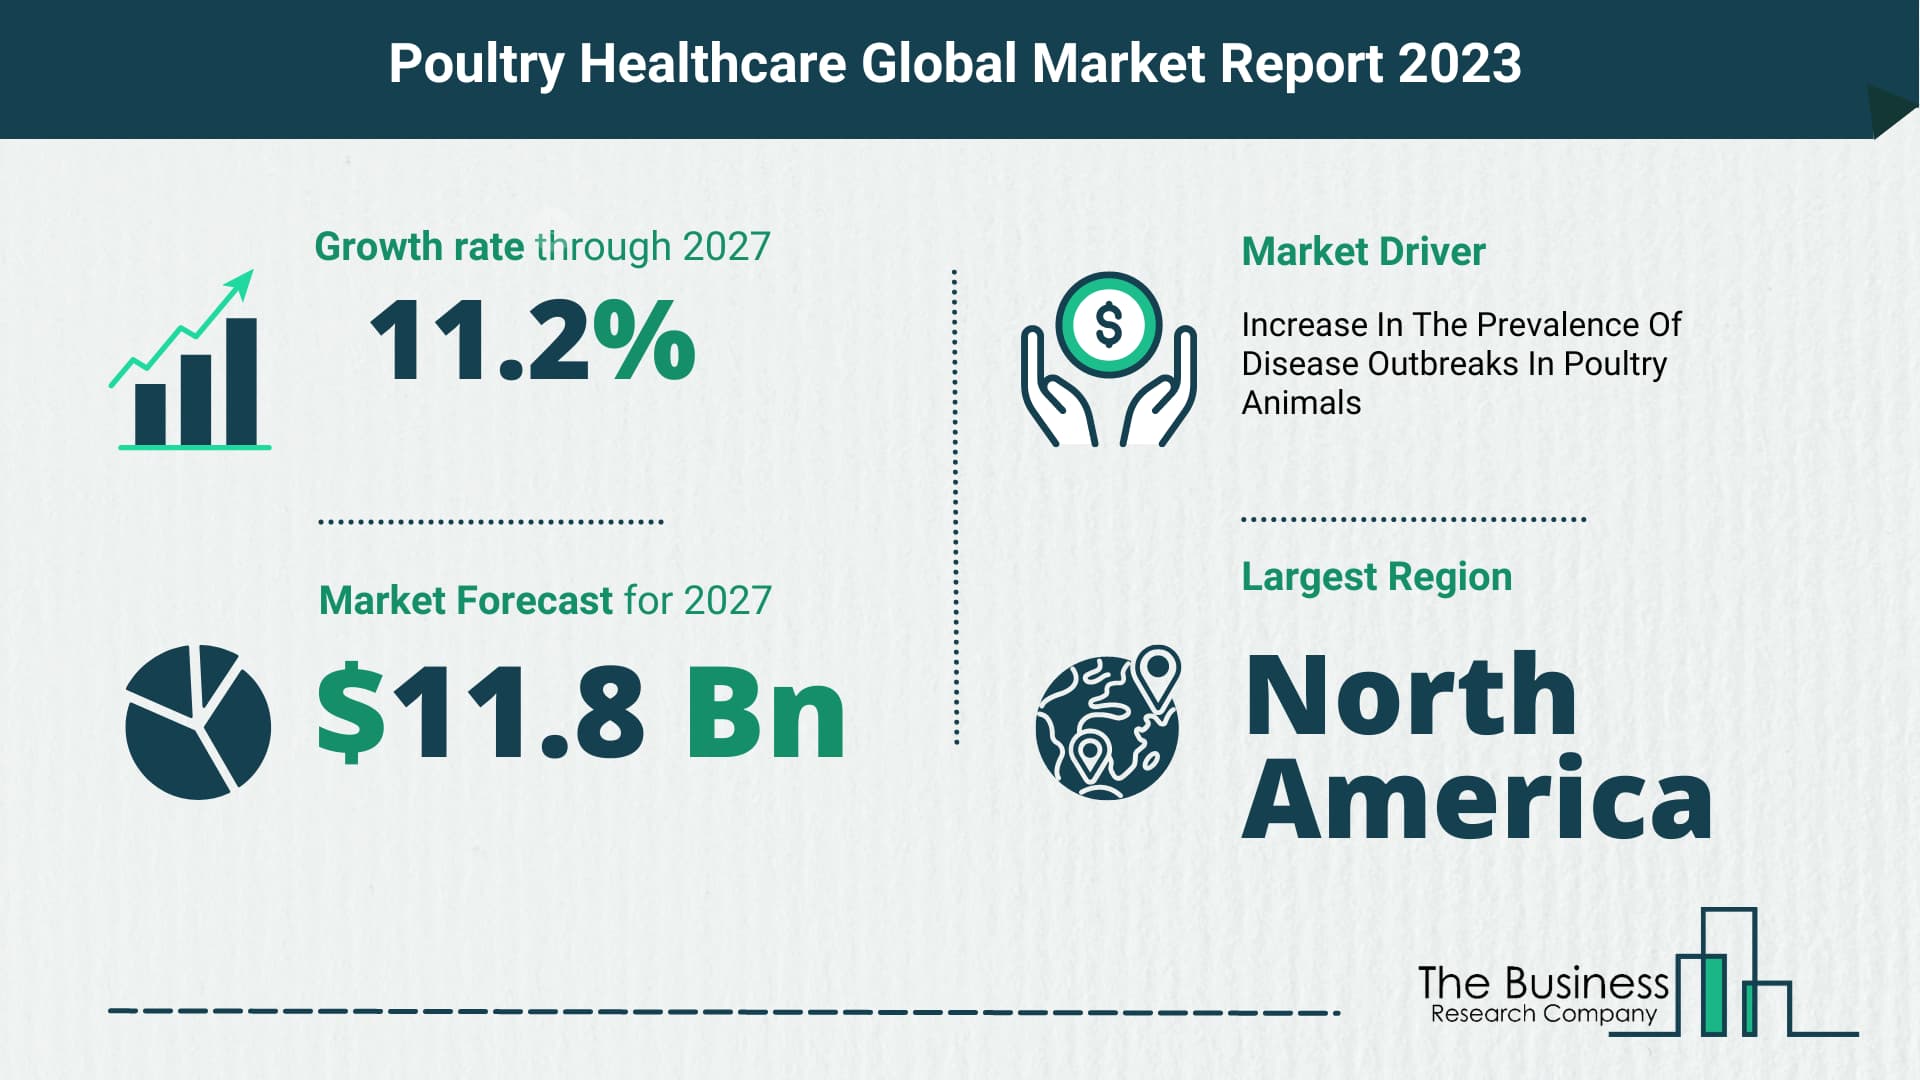 What Will The Poultry Healthcare Market Look Like In 2023?